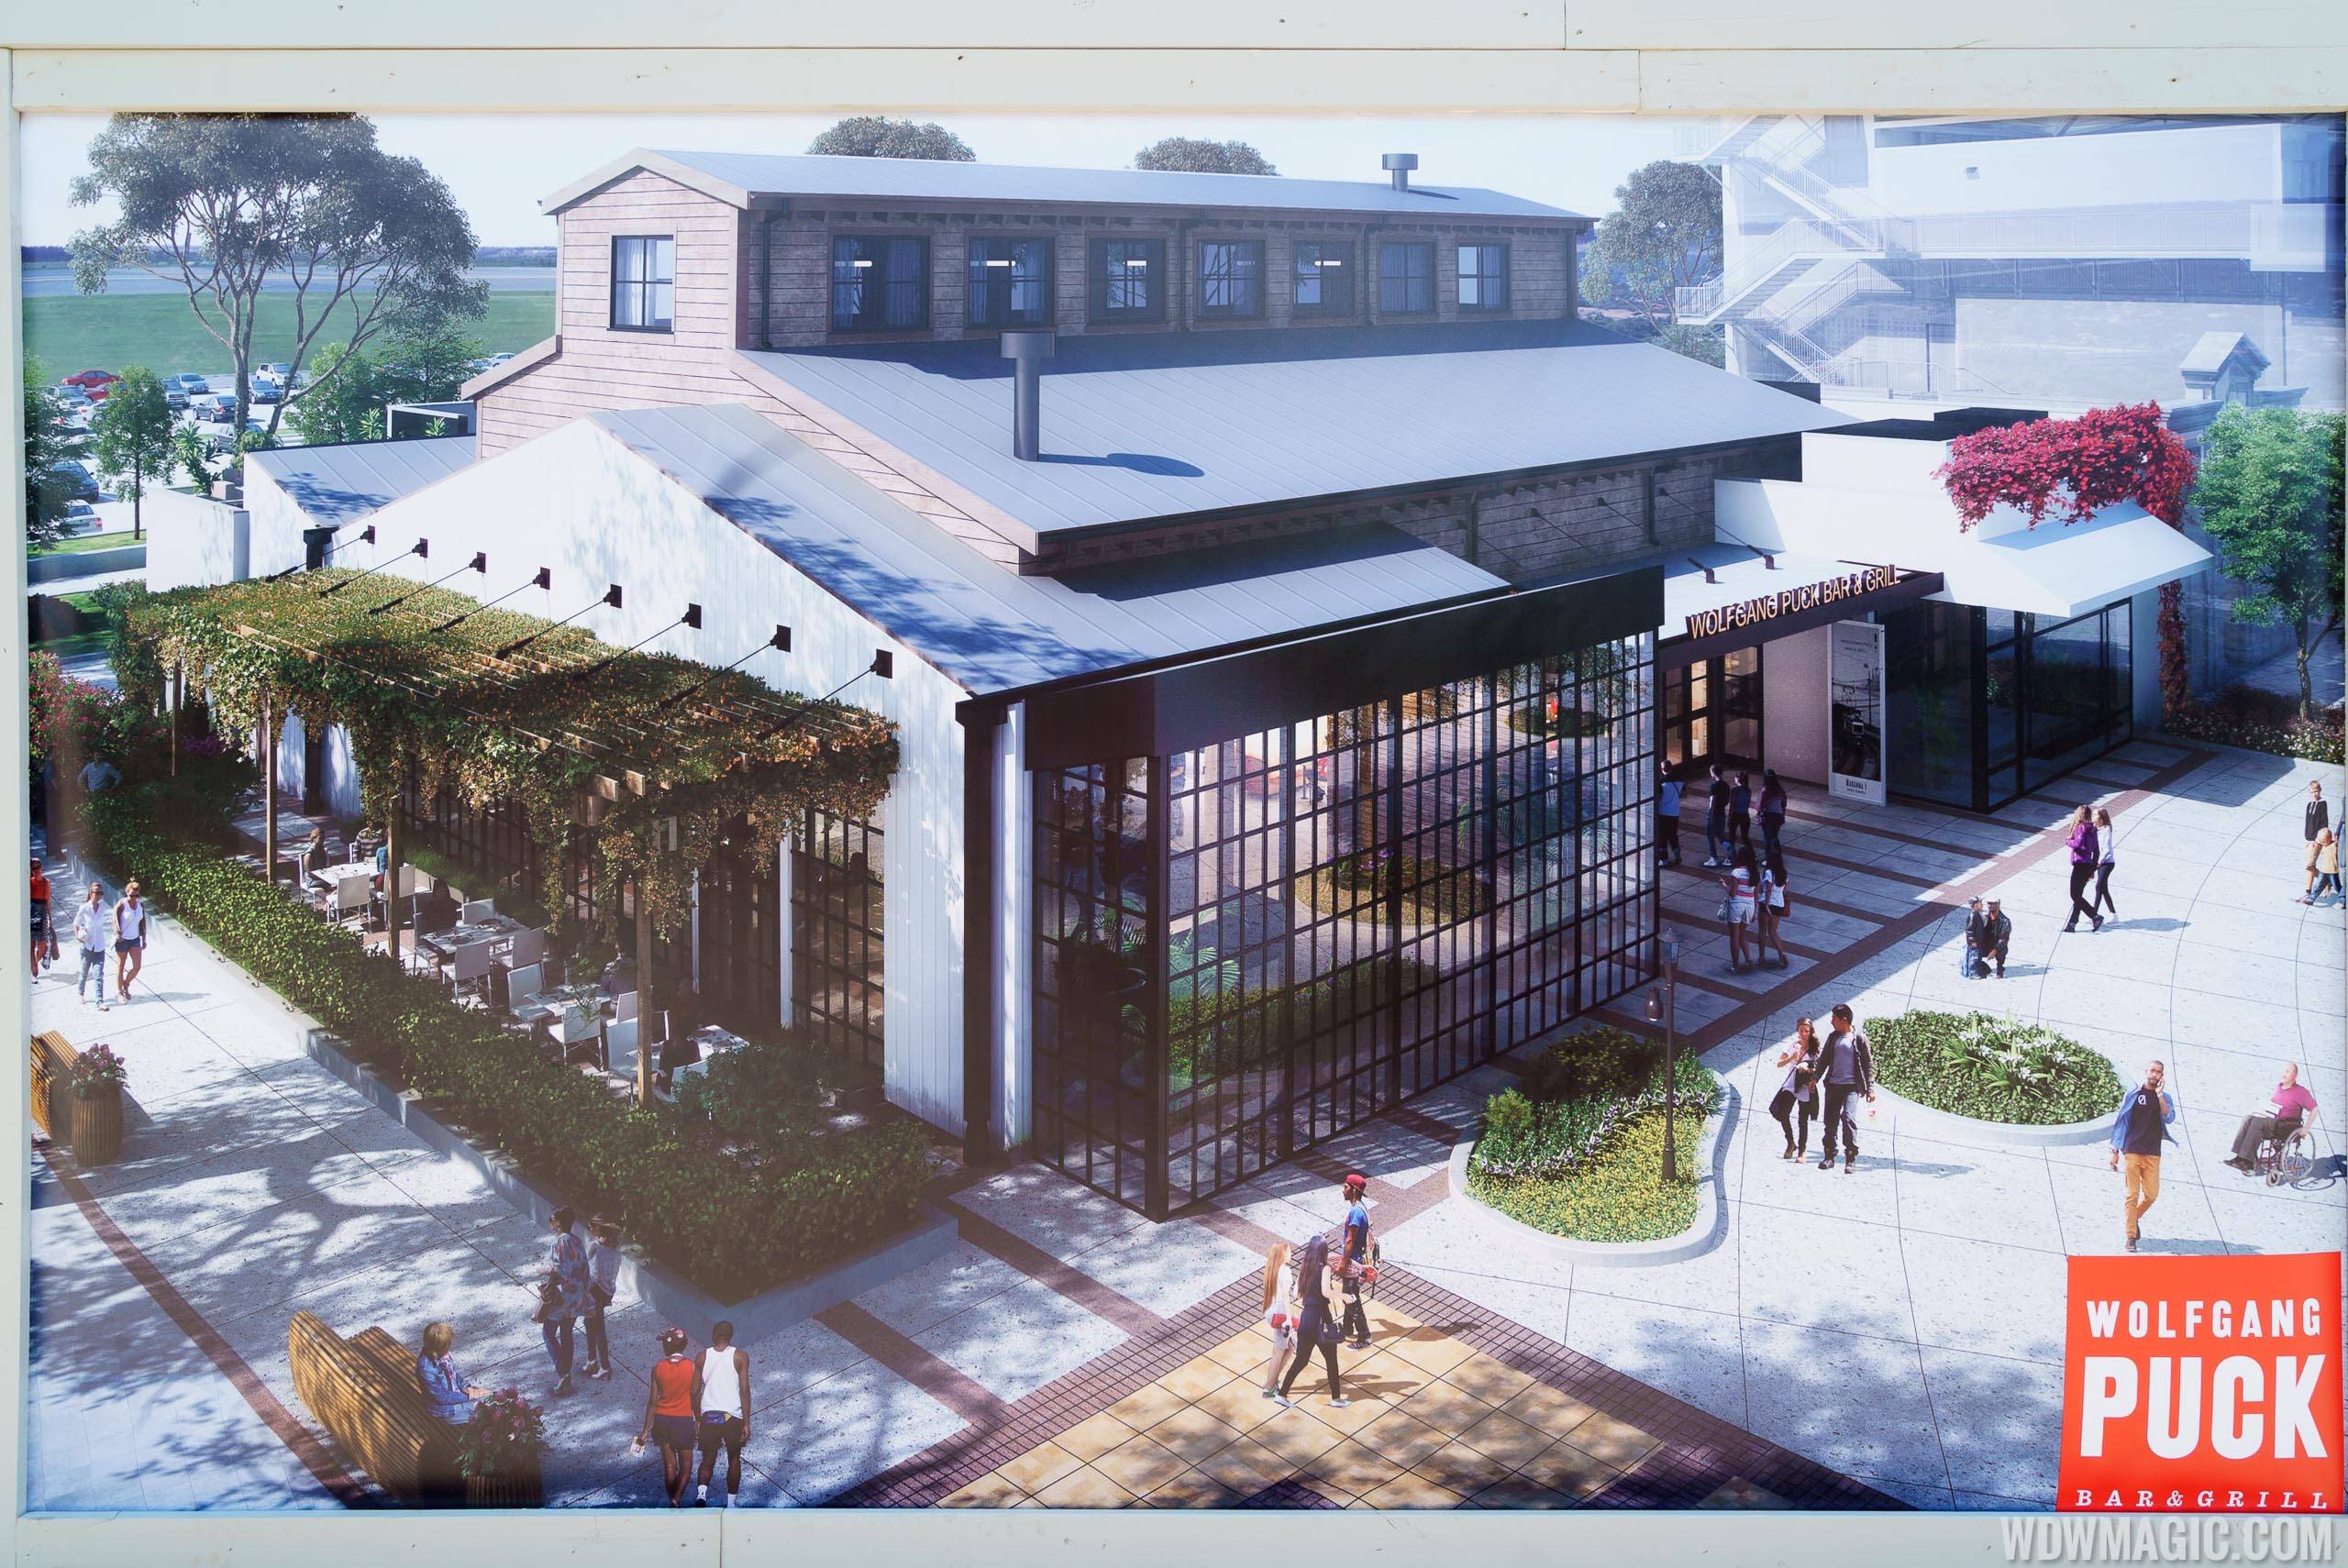 Wolfgang Puck Bar and Grill concept art - Exterior